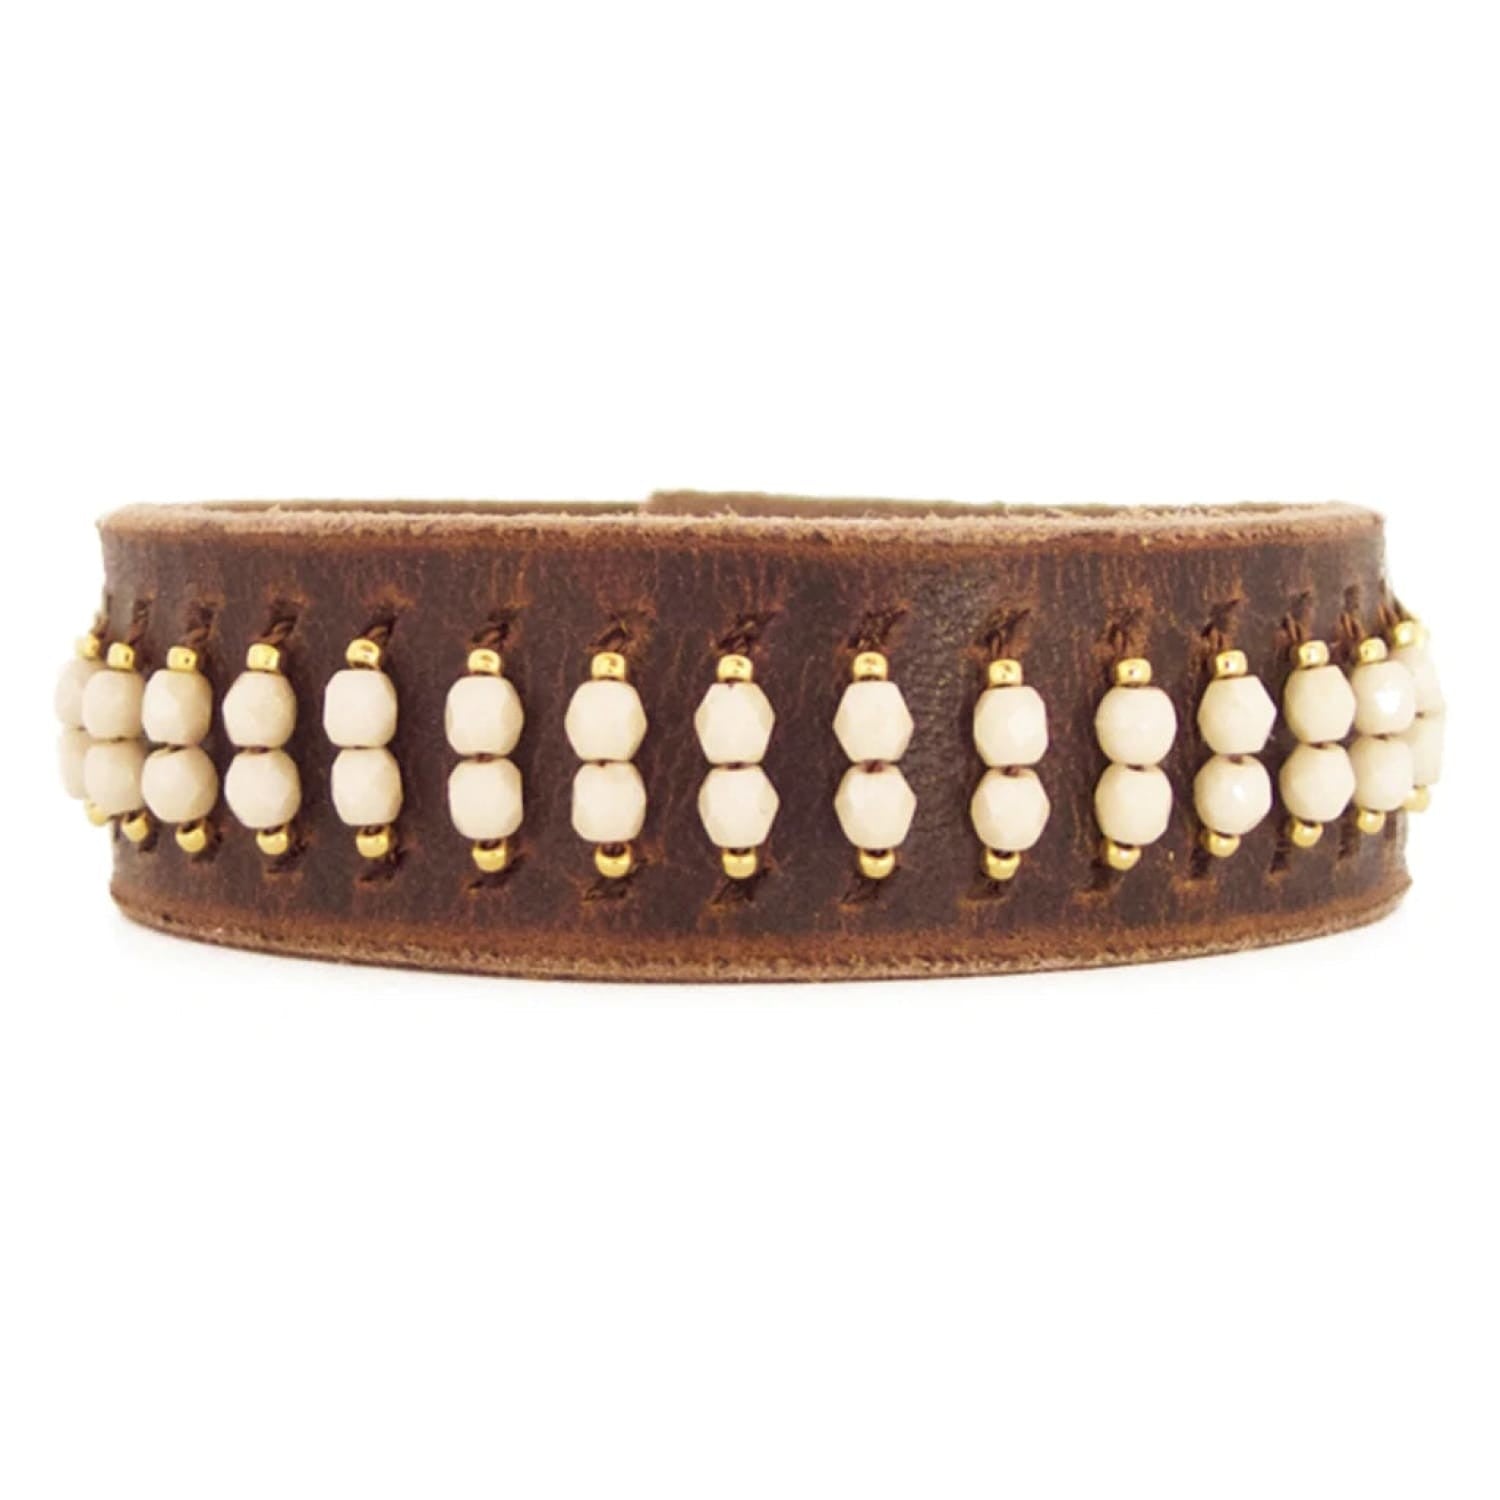 Bronwen brown leather cuff braclet with rows of champagne beads flanked by smaller gold beads.